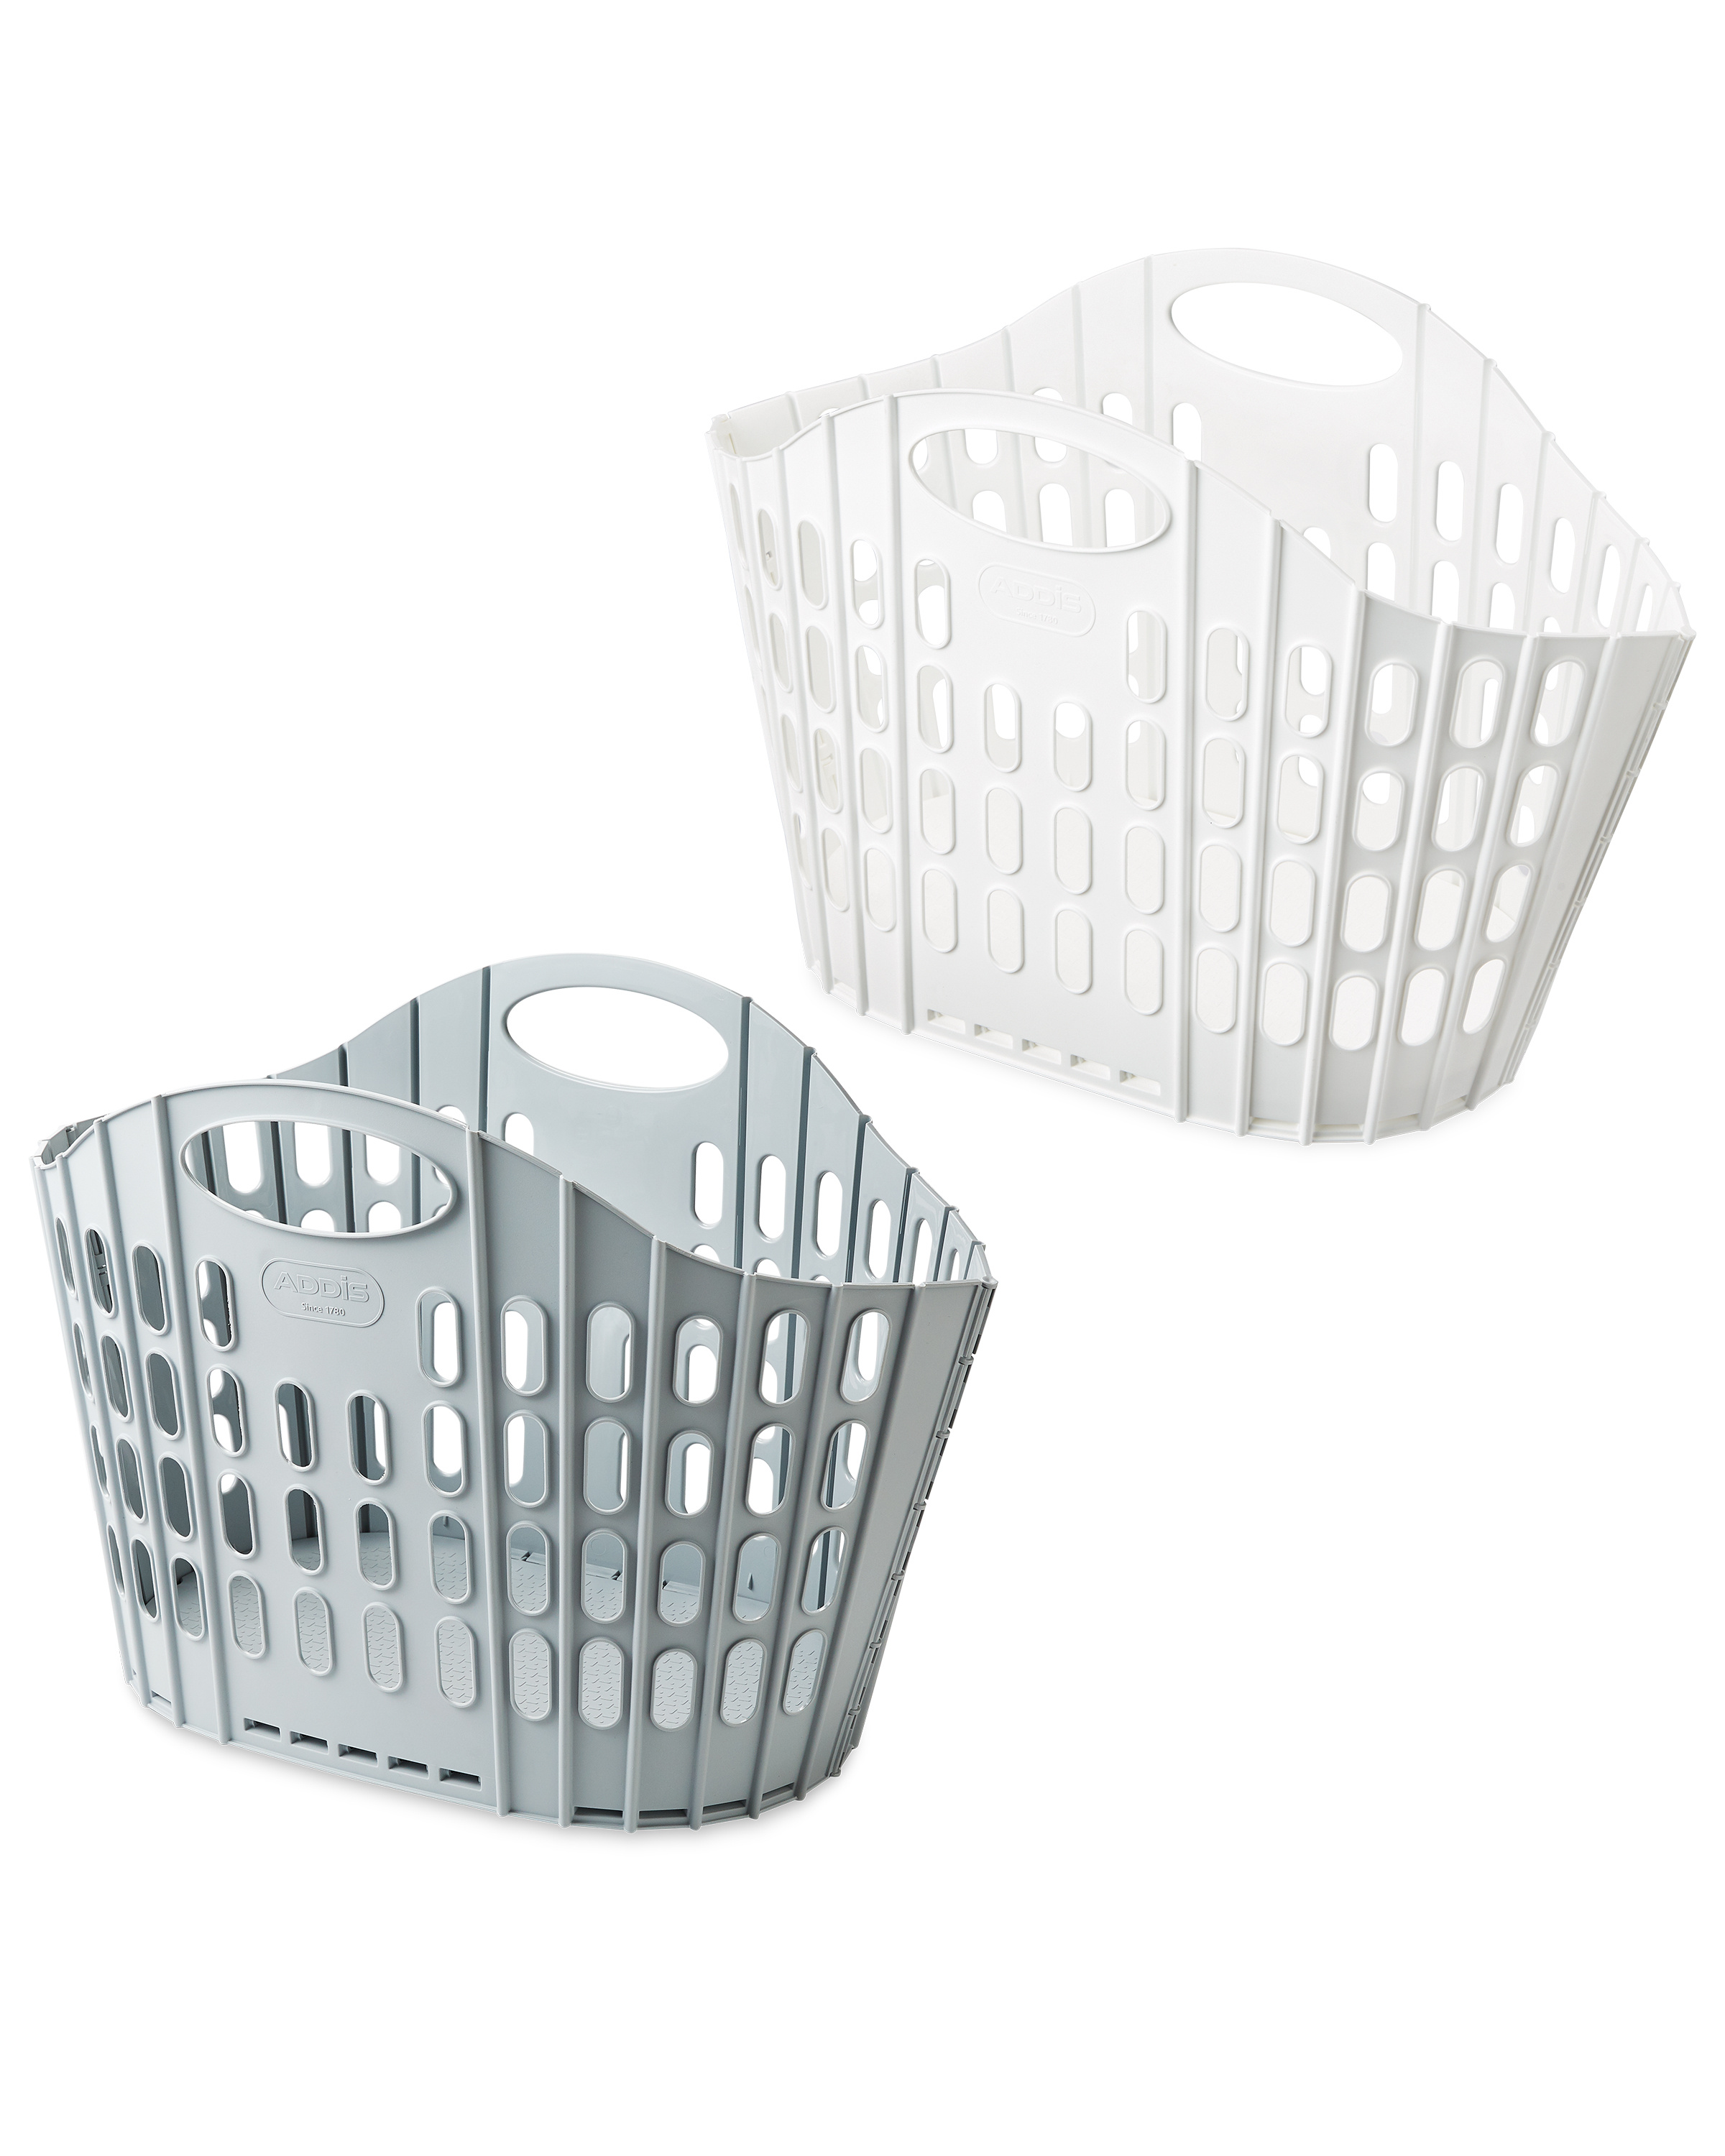 Addis Folding Laundry Basket Aldi Uk Collapsible laundry baskets can save you up to 70% more space than traditional laundry baskets. addis folding laundry basket